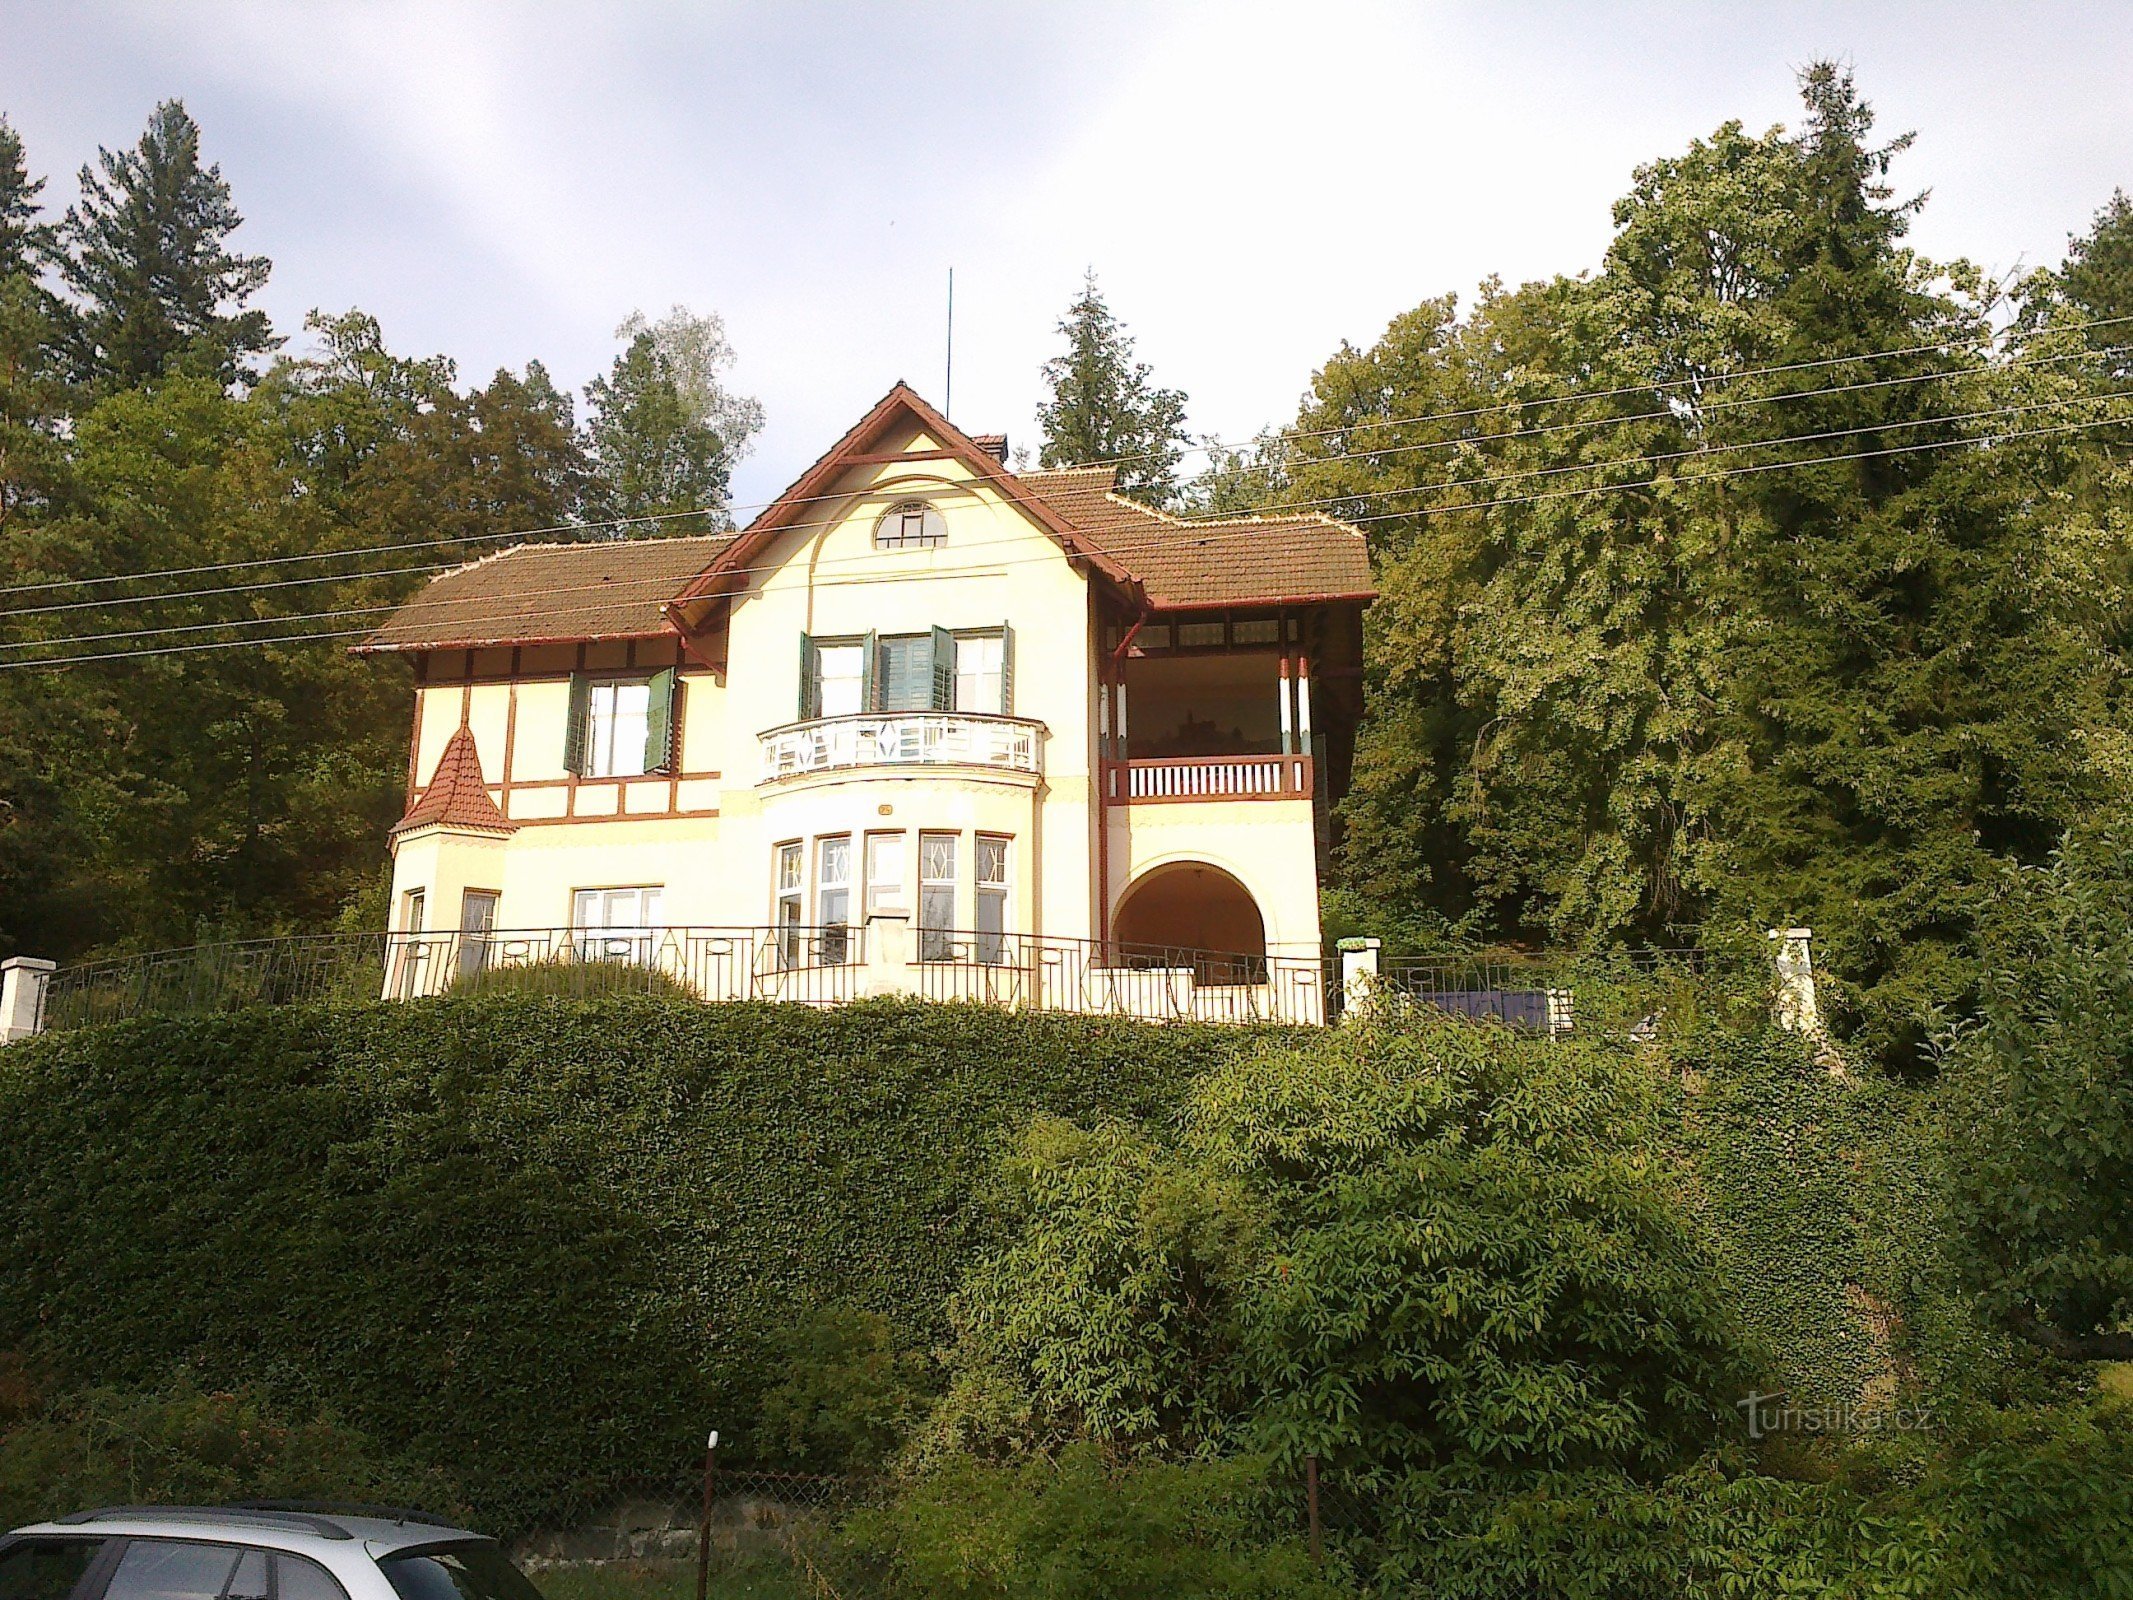 Summer residence of academician Otto Wichterle